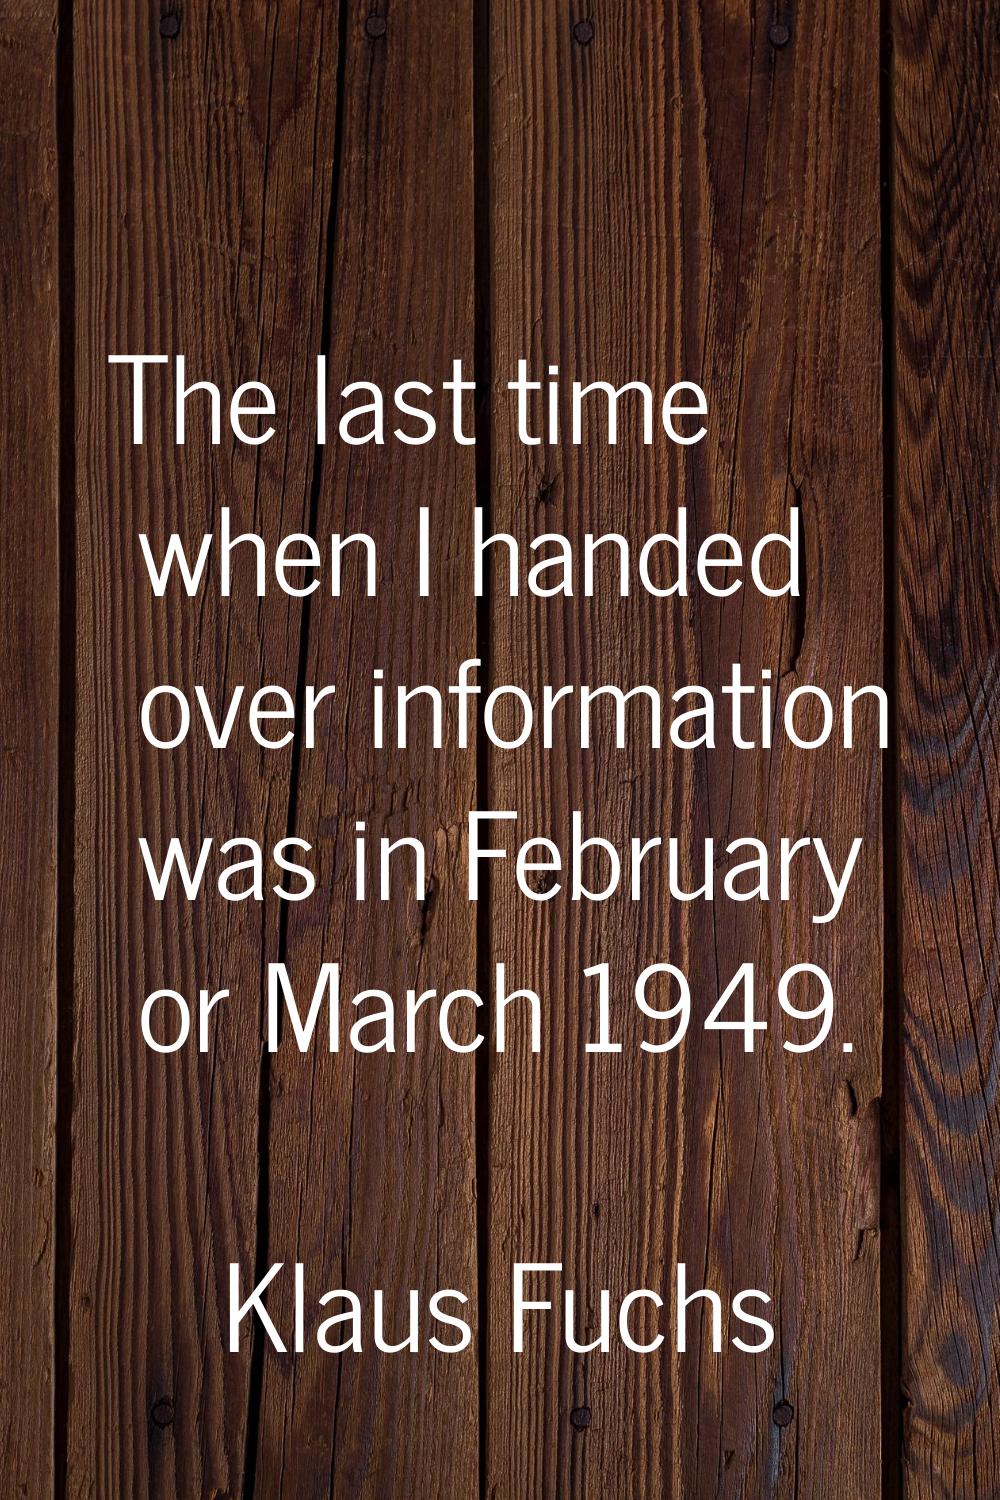 The last time when I handed over information was in February or March 1949.